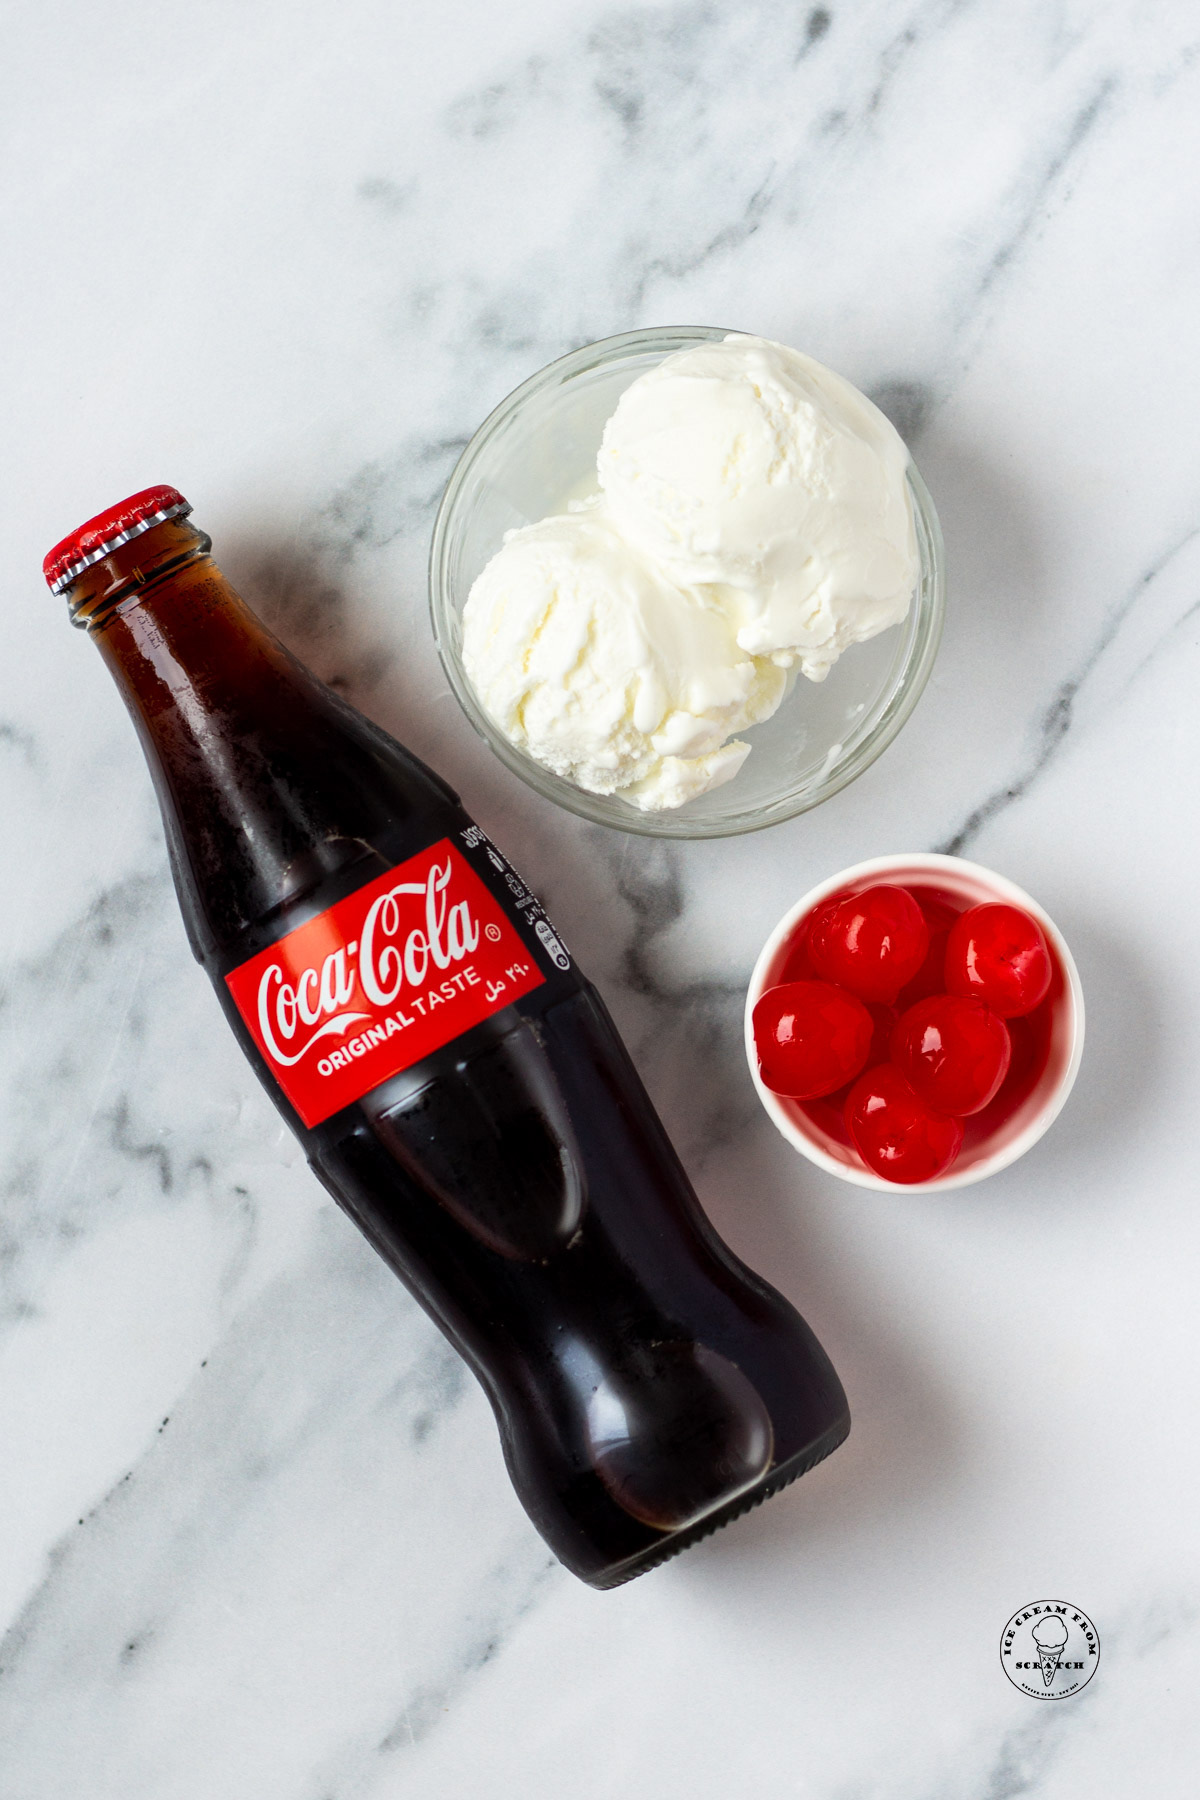 a bowl of vanilla ice cream, a smaller bowl of cherries, and a glass bottle of cocoa cola, viewed from above on a marble counter